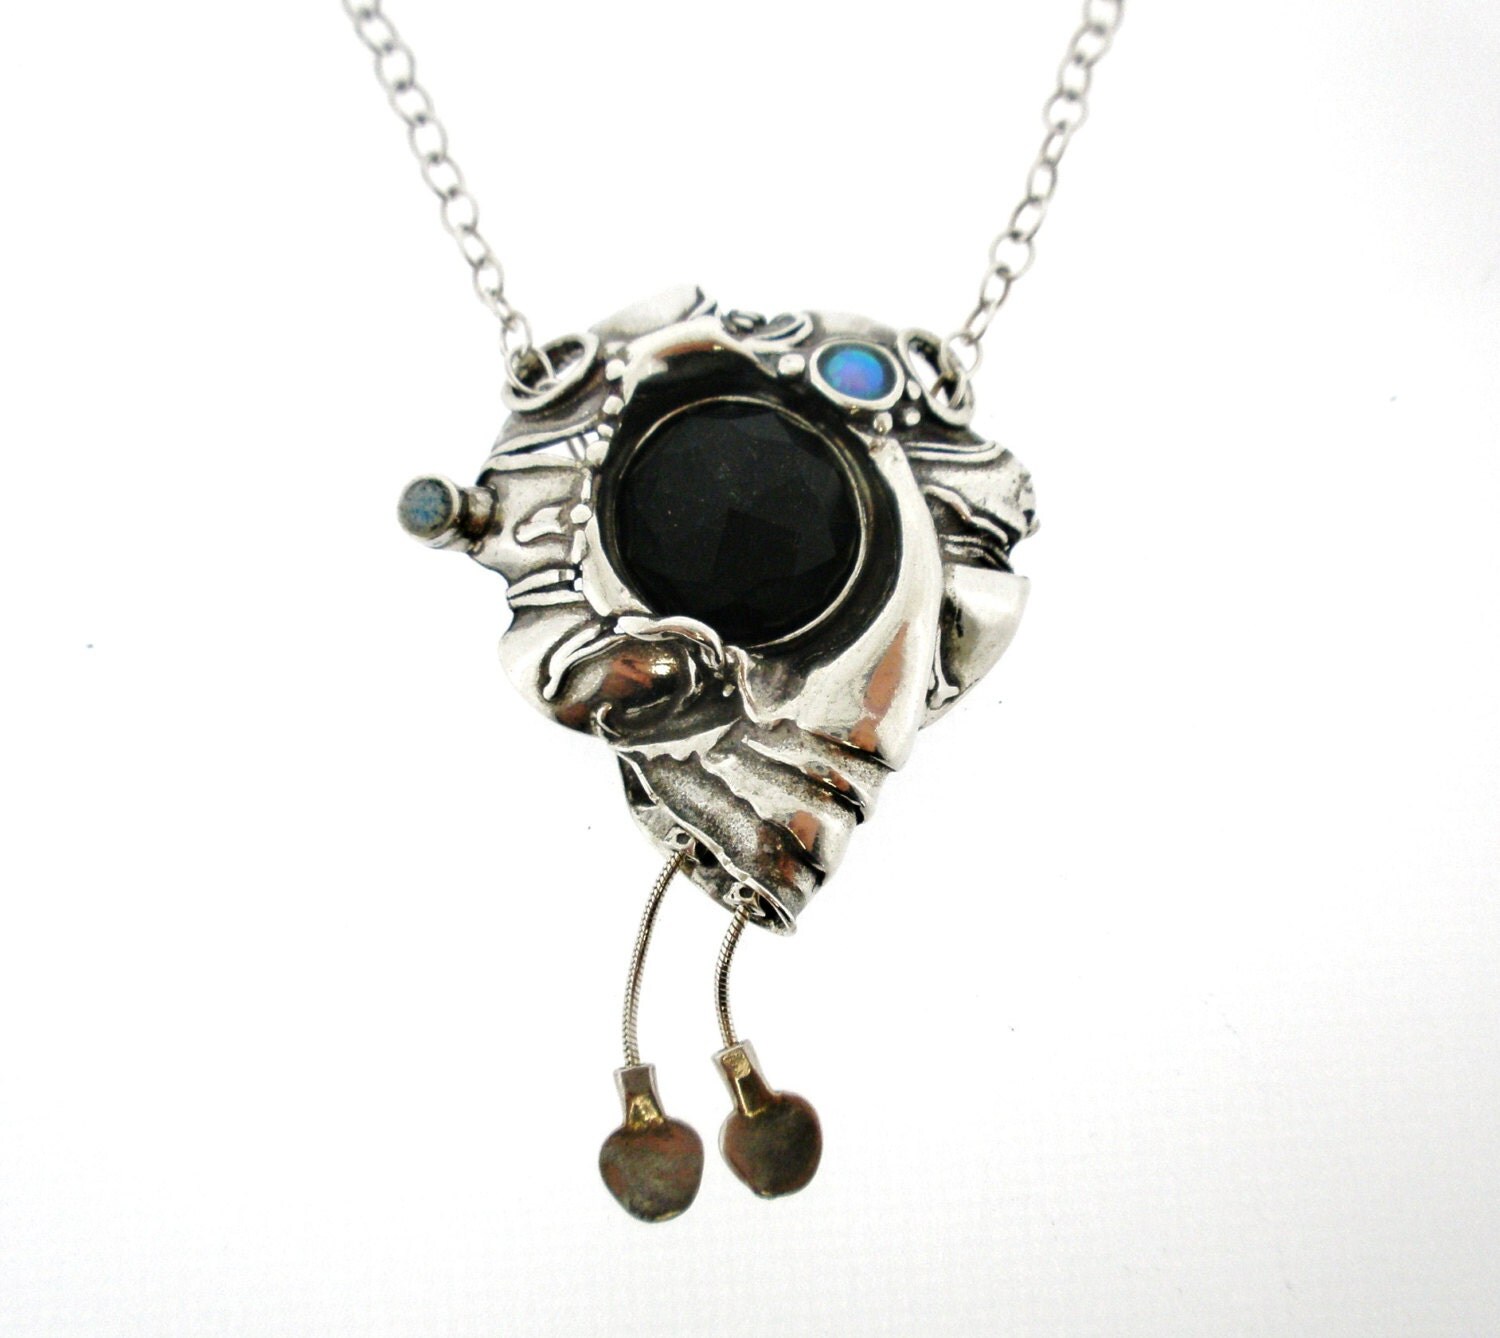 Opal and Onyx Necklace Sterling Silver Necklace Pendant